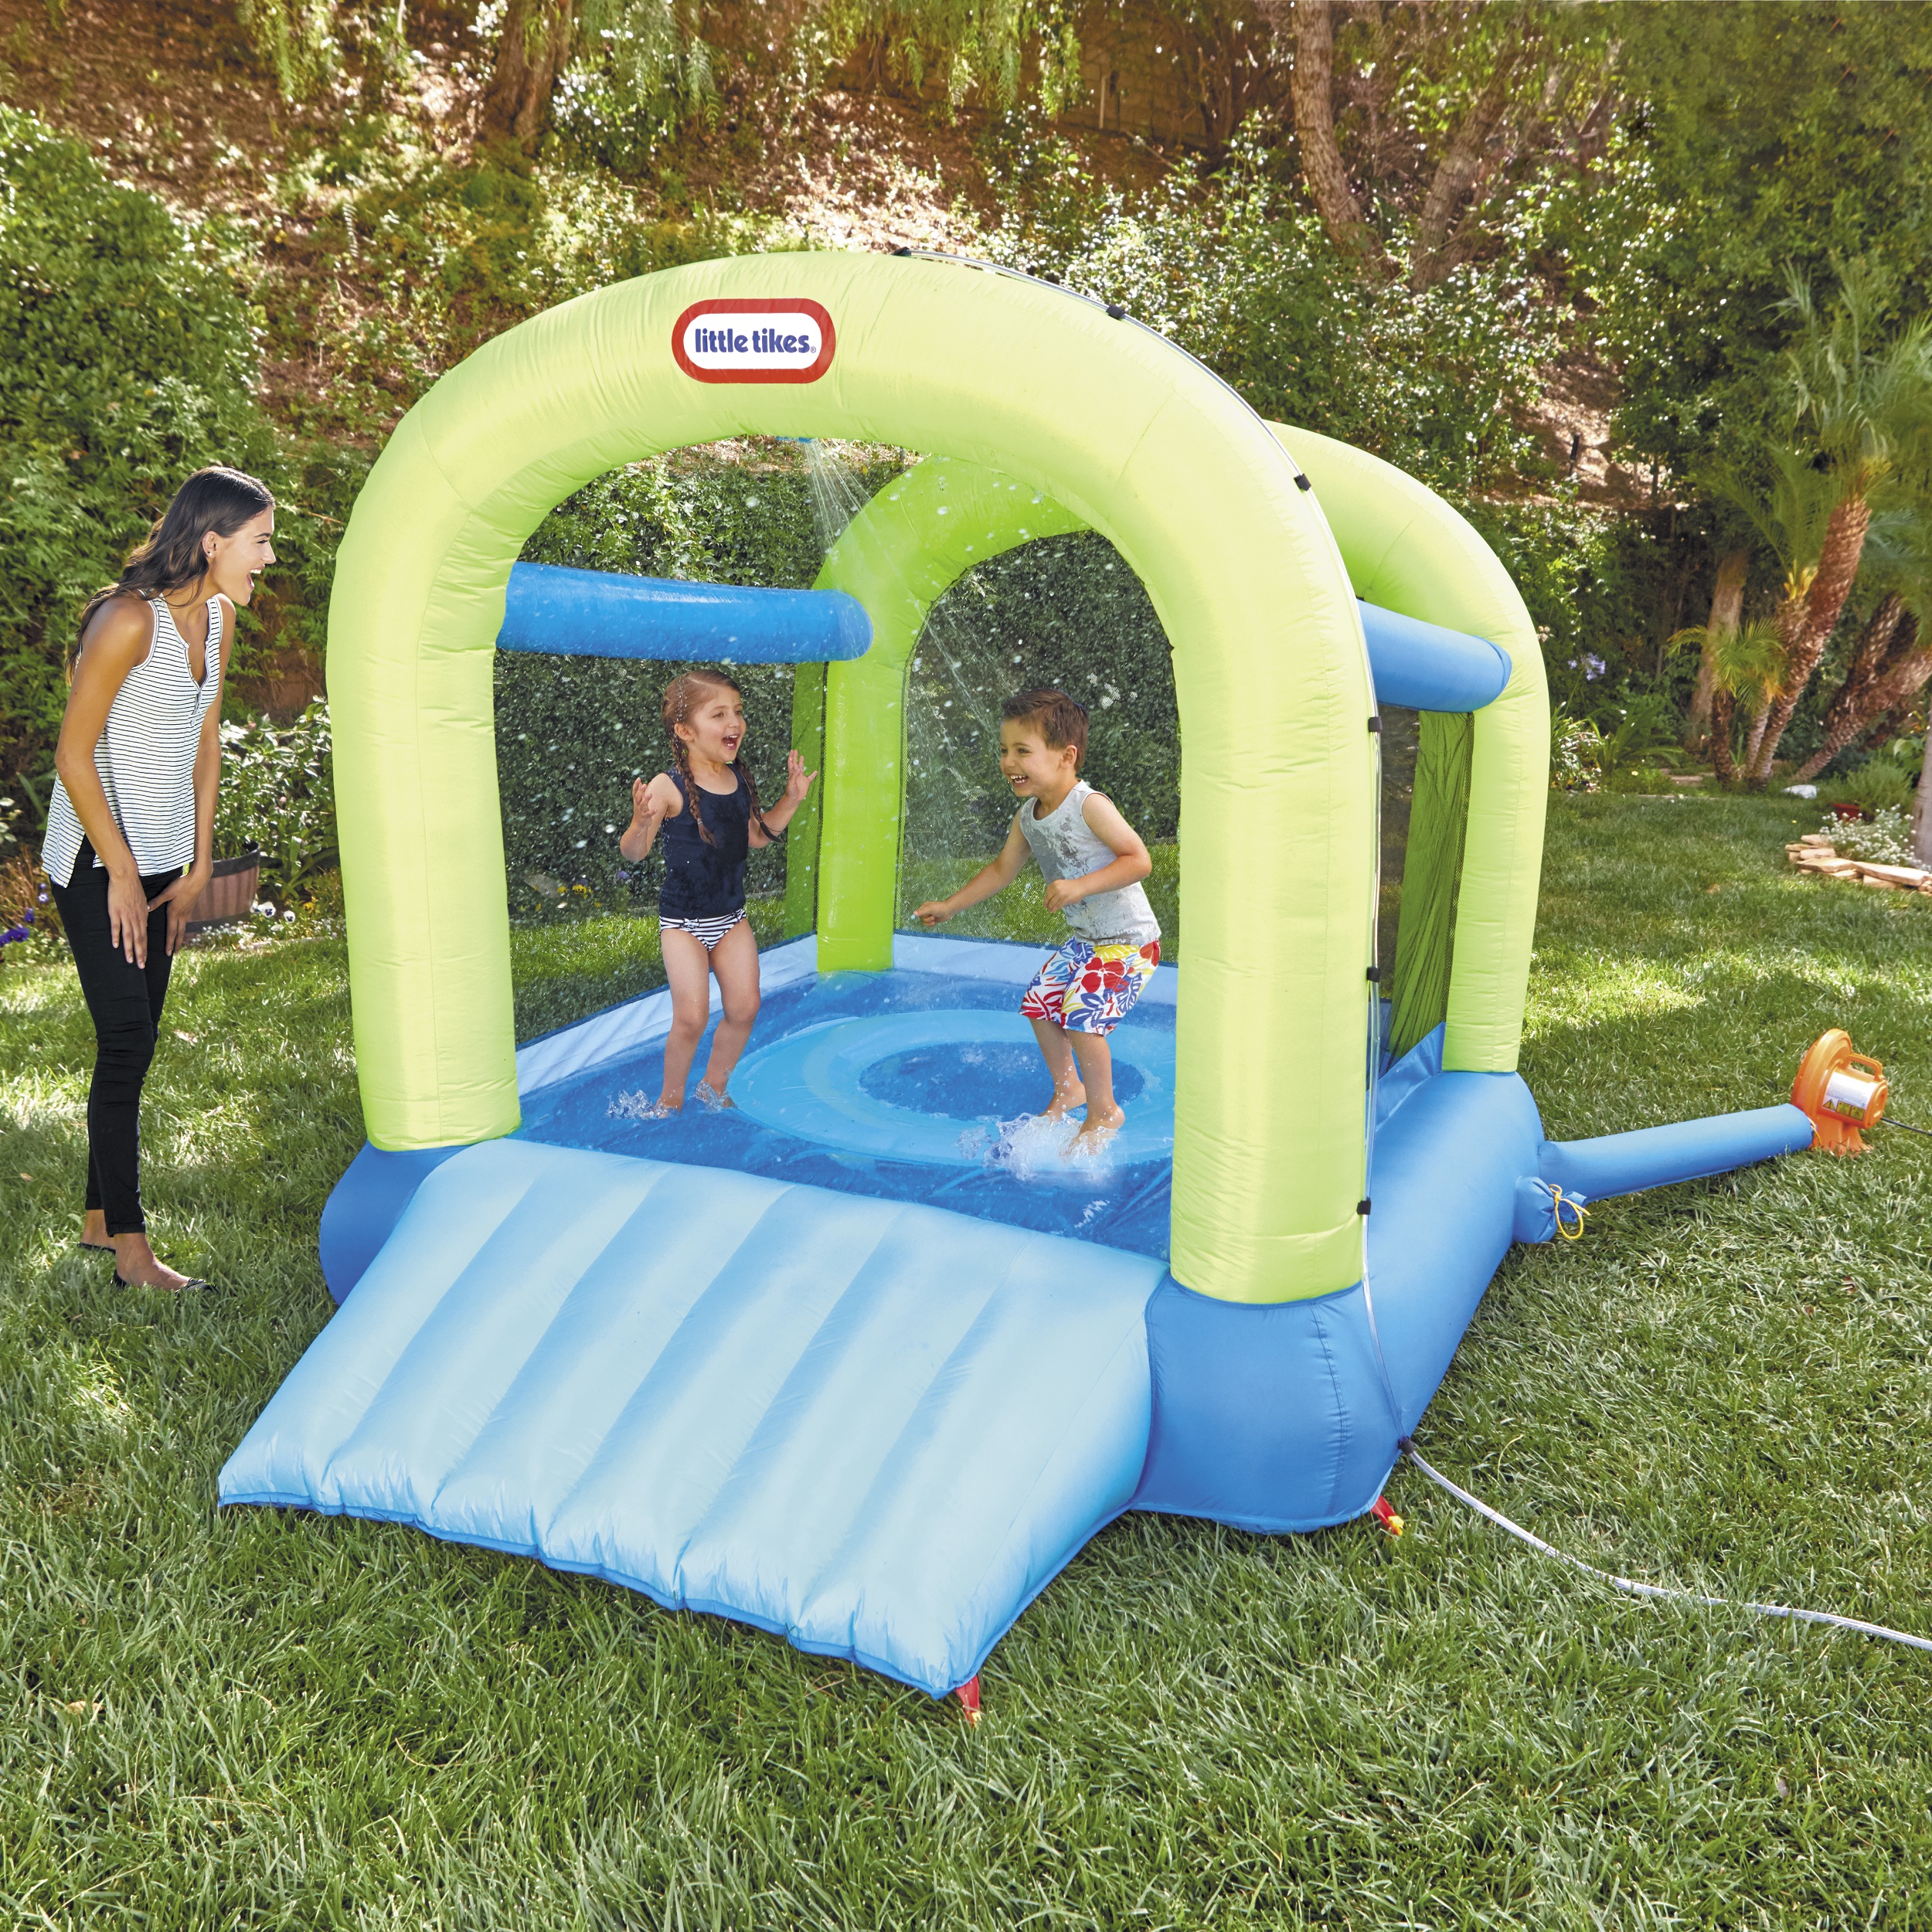 Girls　Boys　and　Inflatable　Years　Ages　Outdoor　Little　n'　Backyard　For　Slide,　Bounce　Toy　Blower,　Spray　Kids,　Tikes　with　Splash　Fits　2-in-1　Spray　Indoor　3-8　House　Water